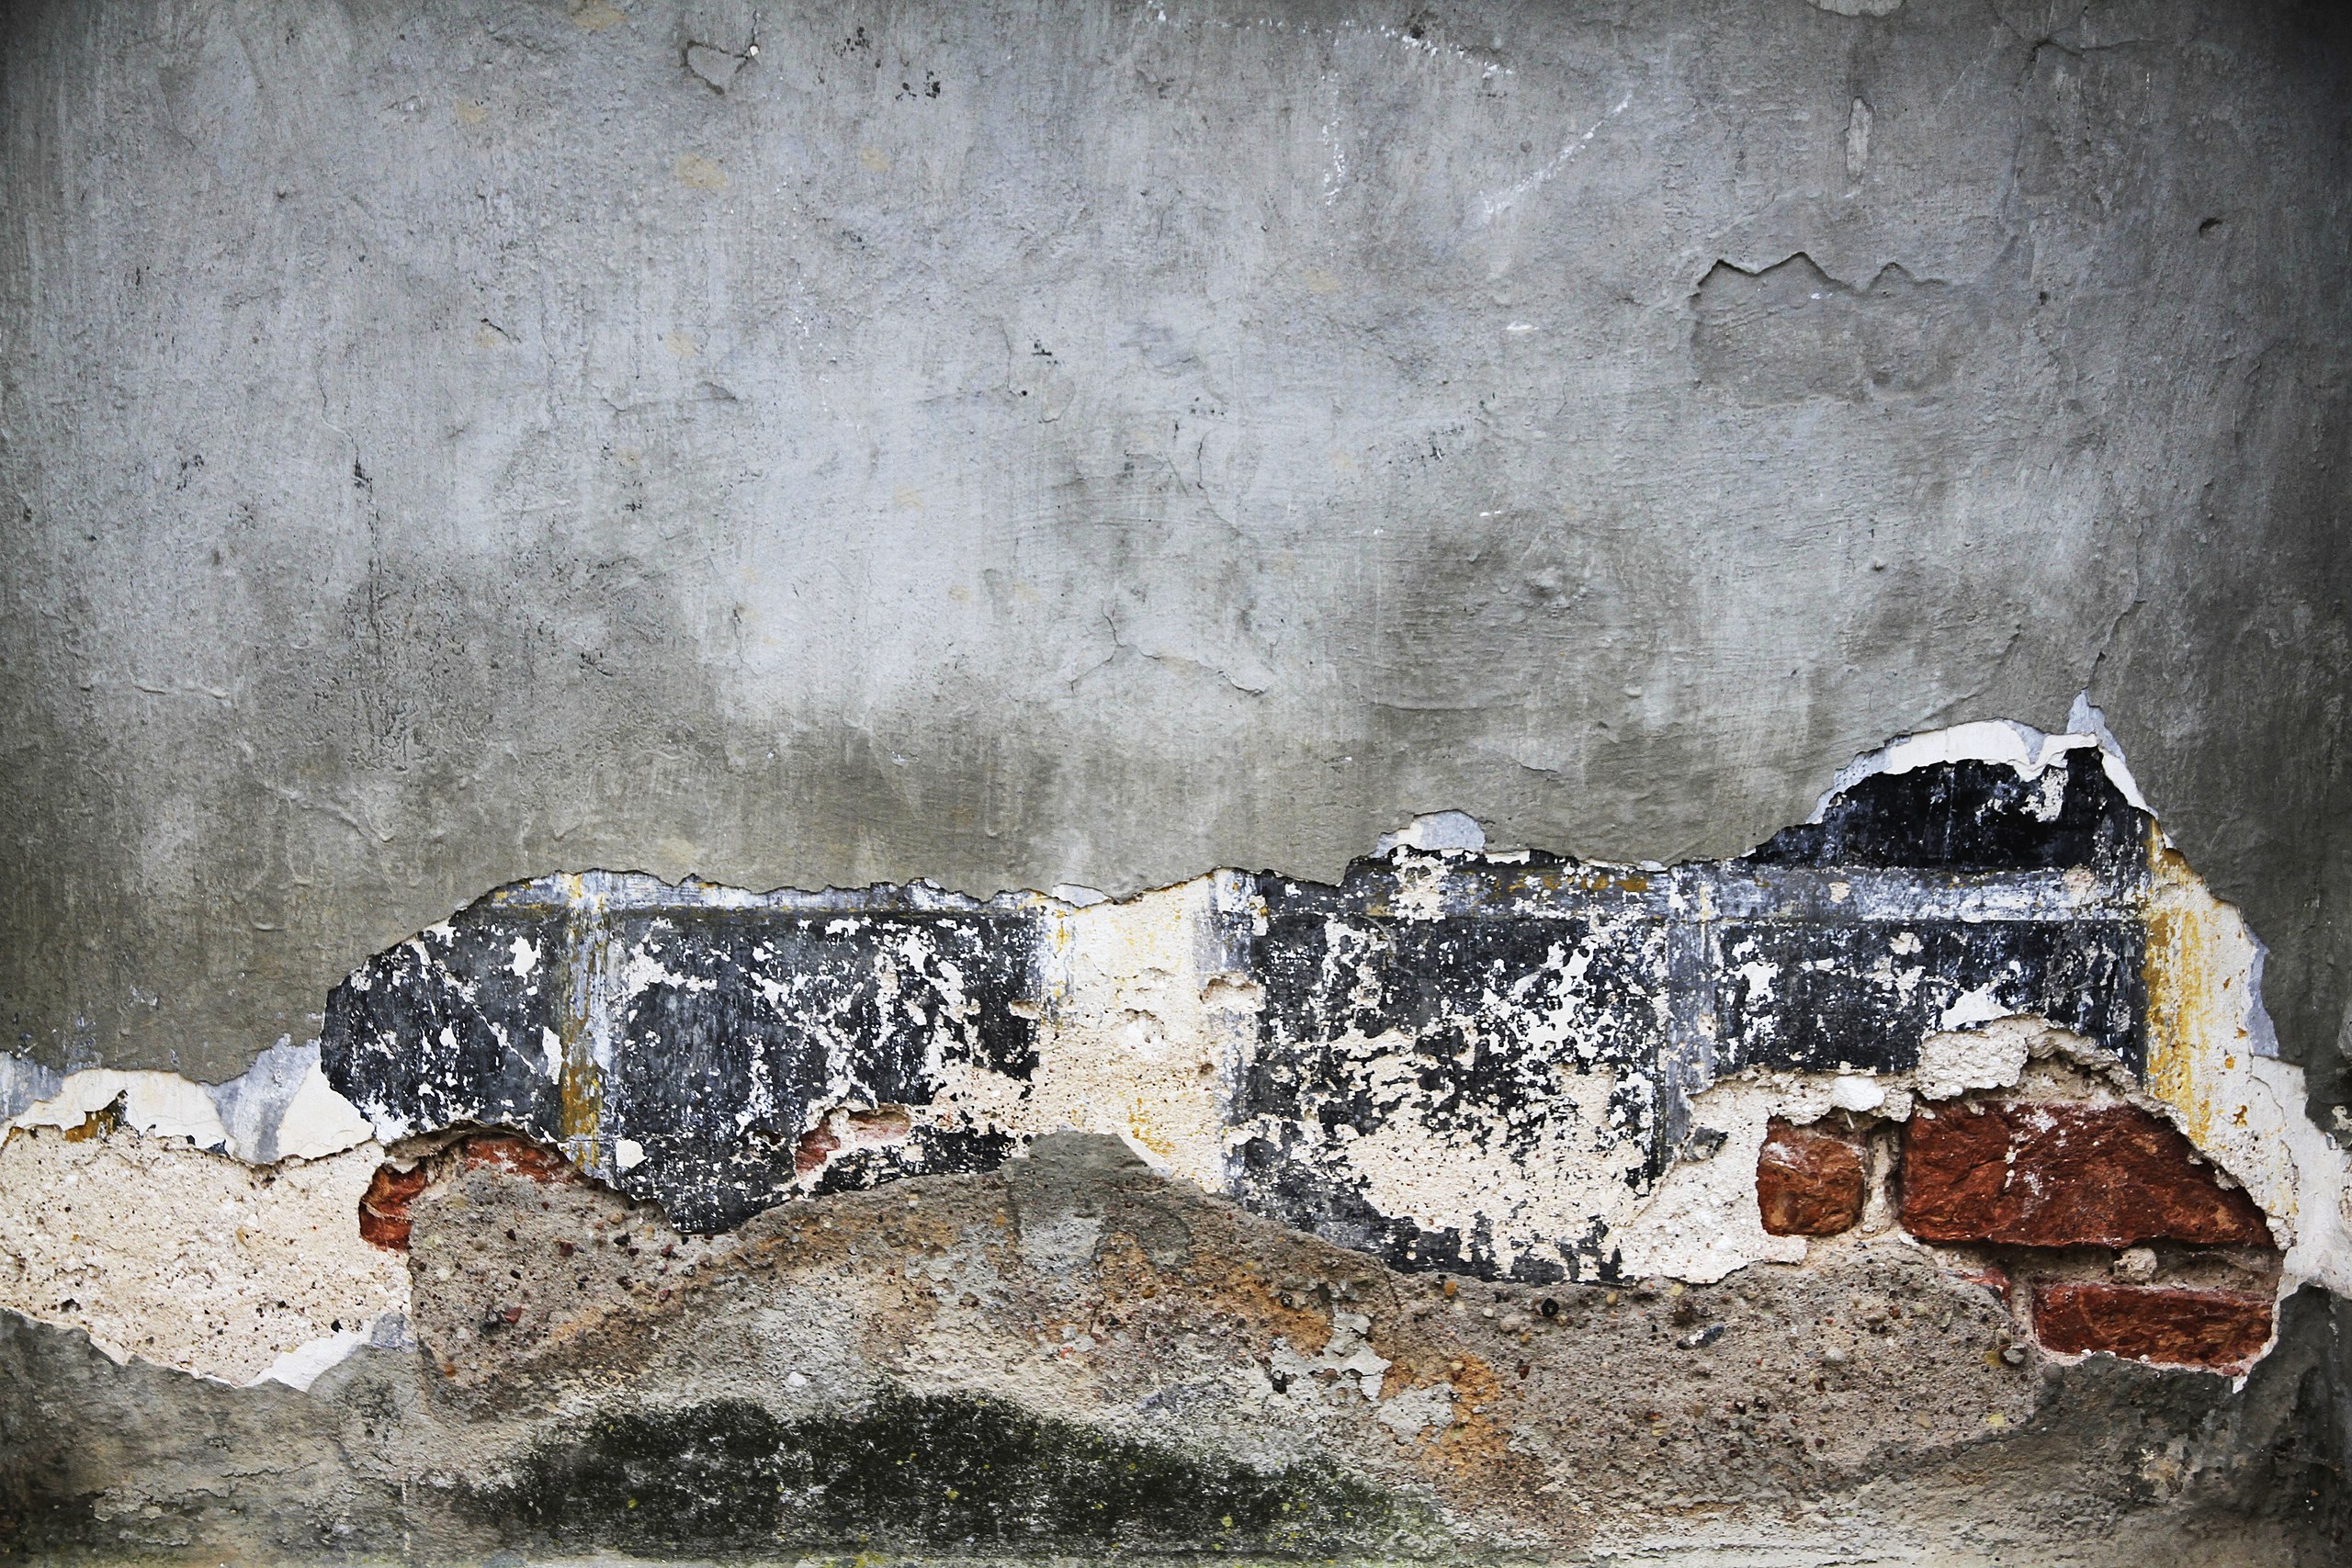 File:Beate Gjersvold The Colours of the Fortress II.jpg - Wikimedia Commons